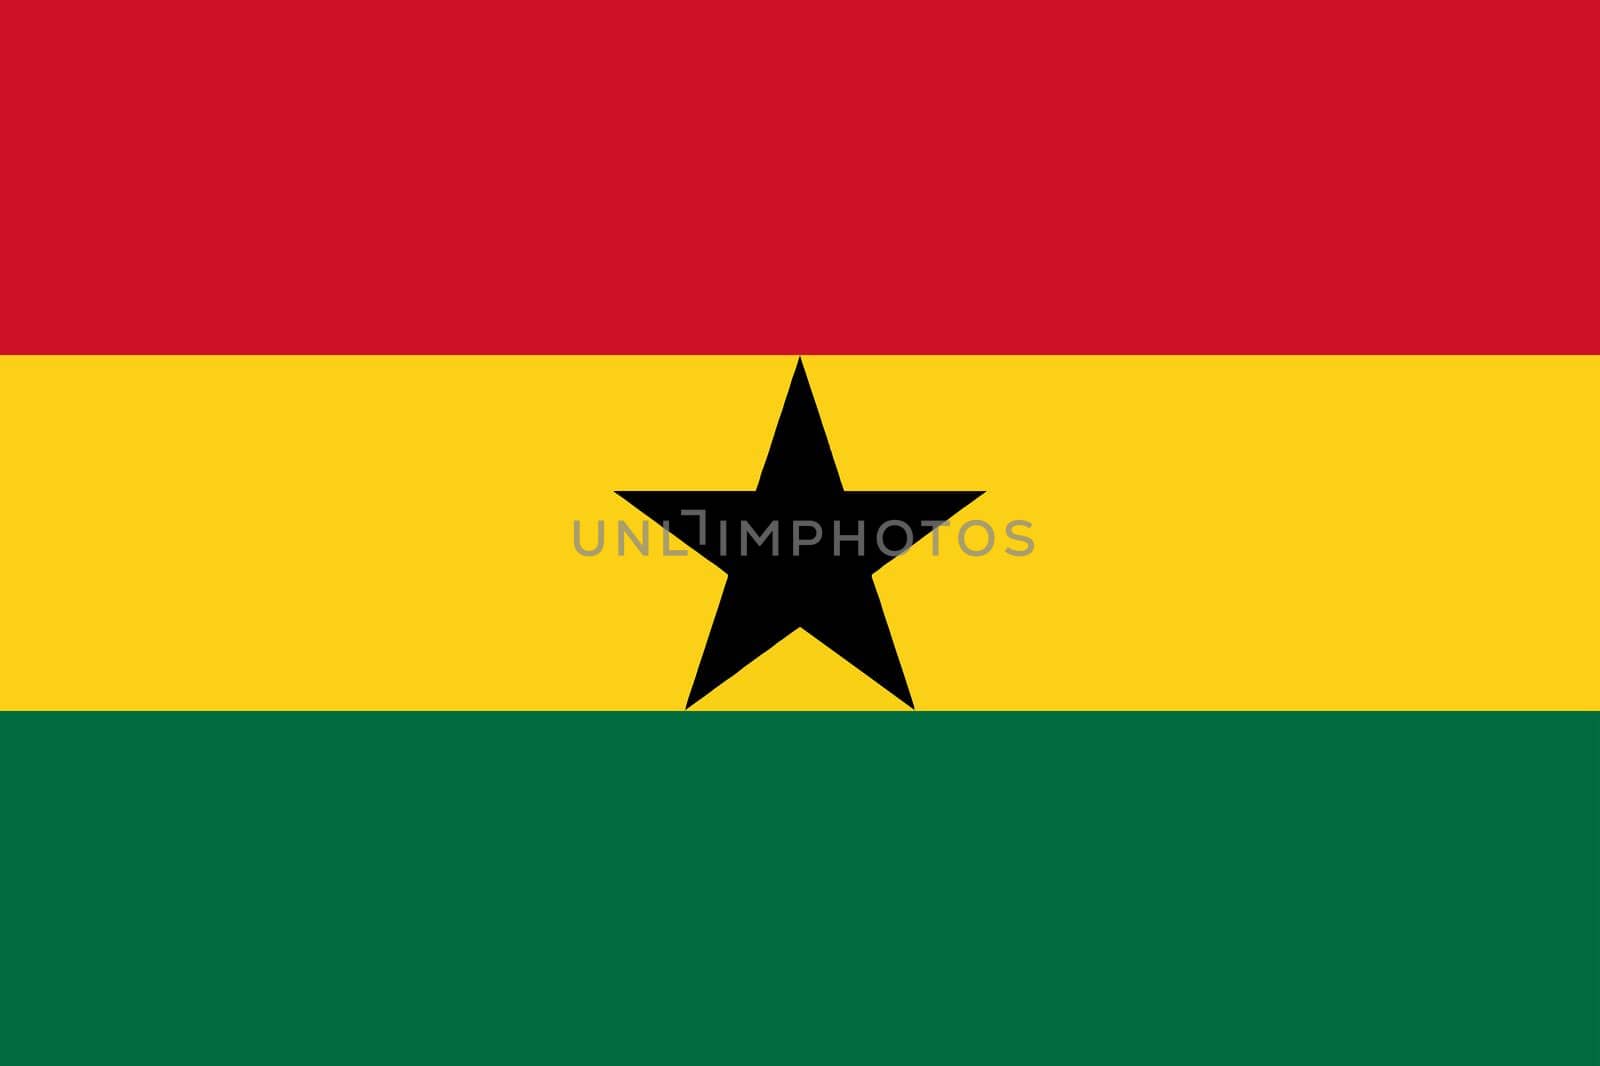 The flag of the African country of Ghana